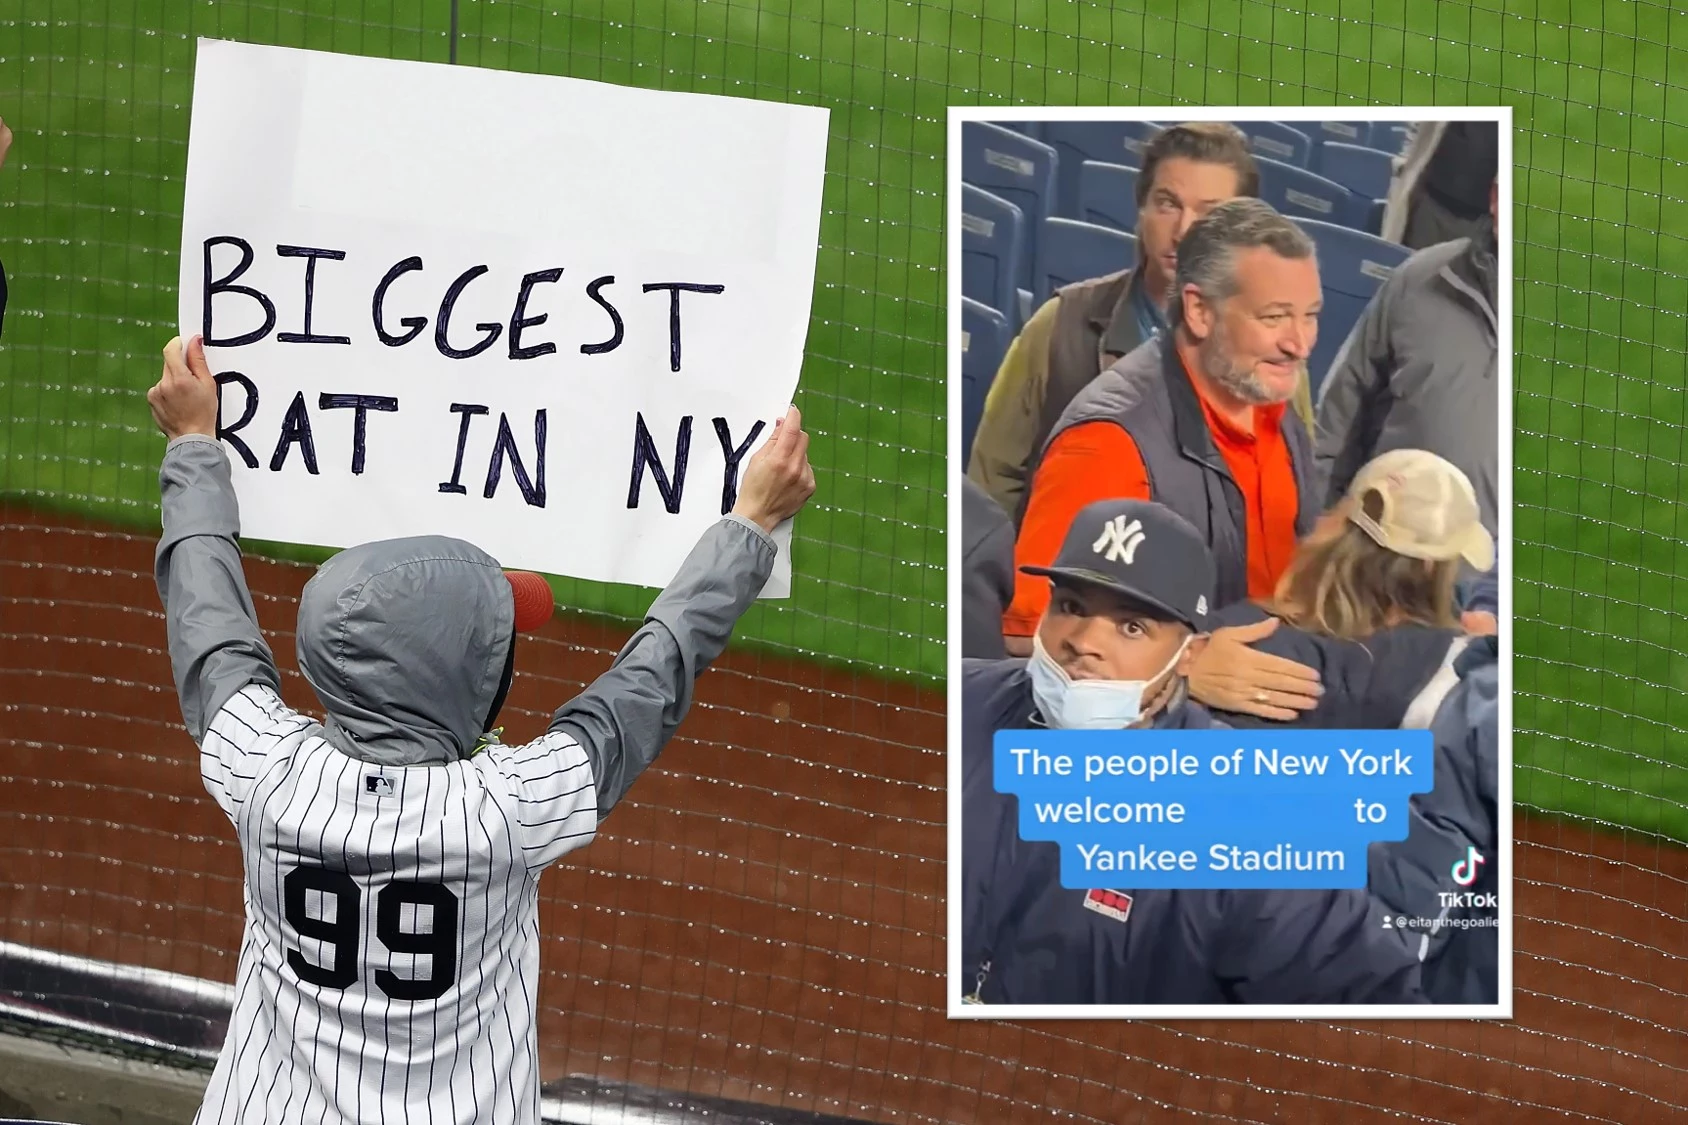 New York Yankees Fans Jeer Politician Ted Cruz During ALCS Game